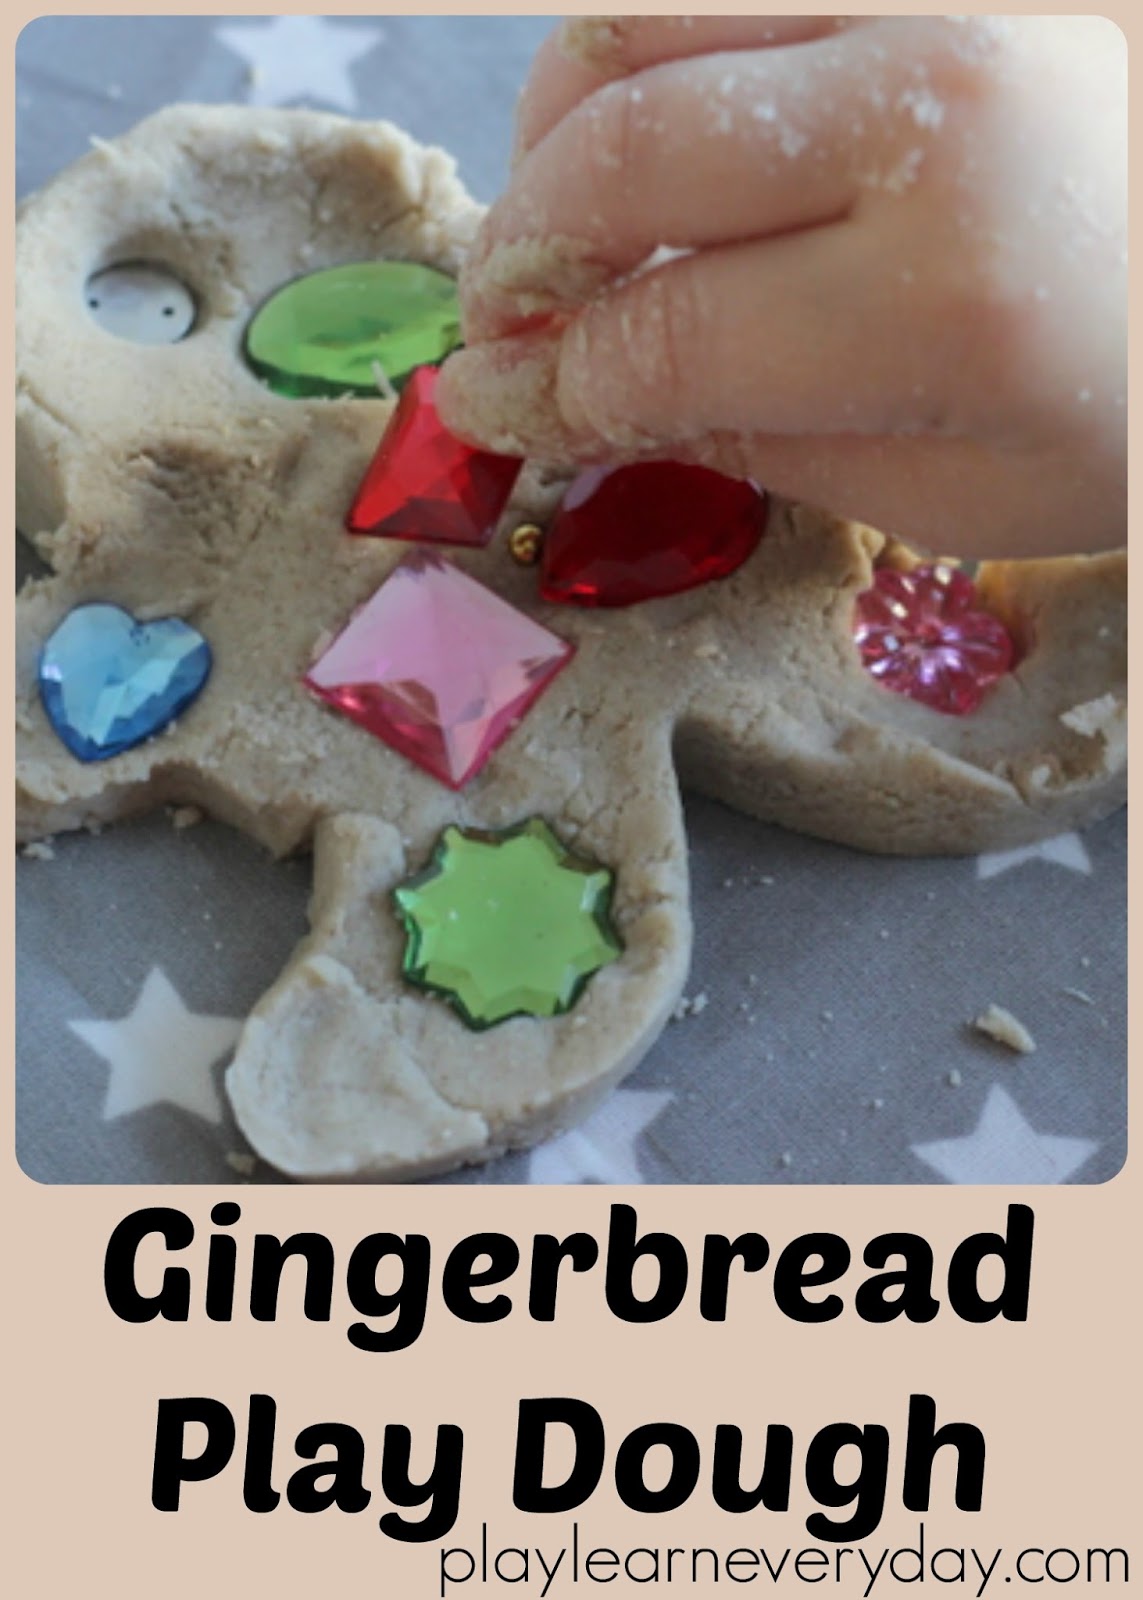 Gingerbread Play Dough - Play and Learn Every Day